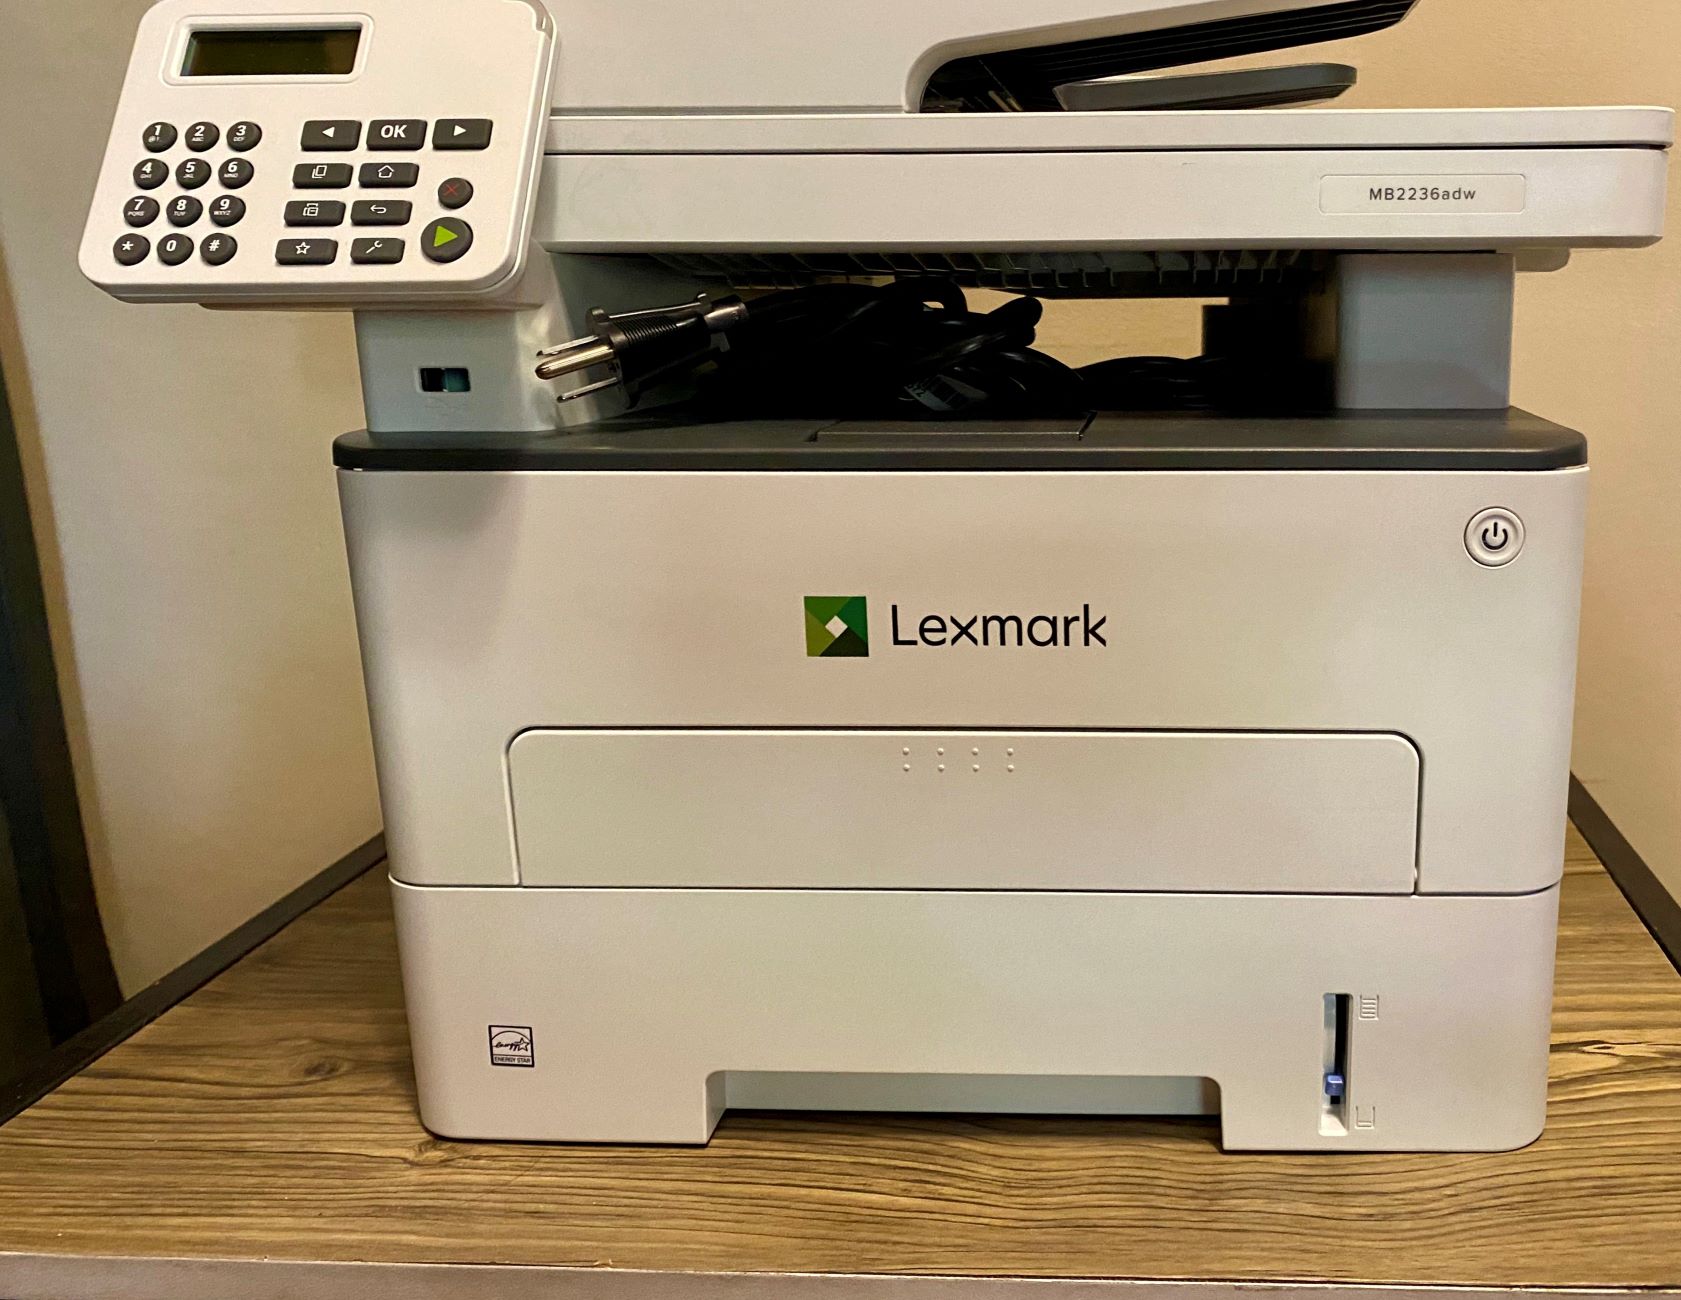 How To Connect A Lexmark Printer To Wi-Fi